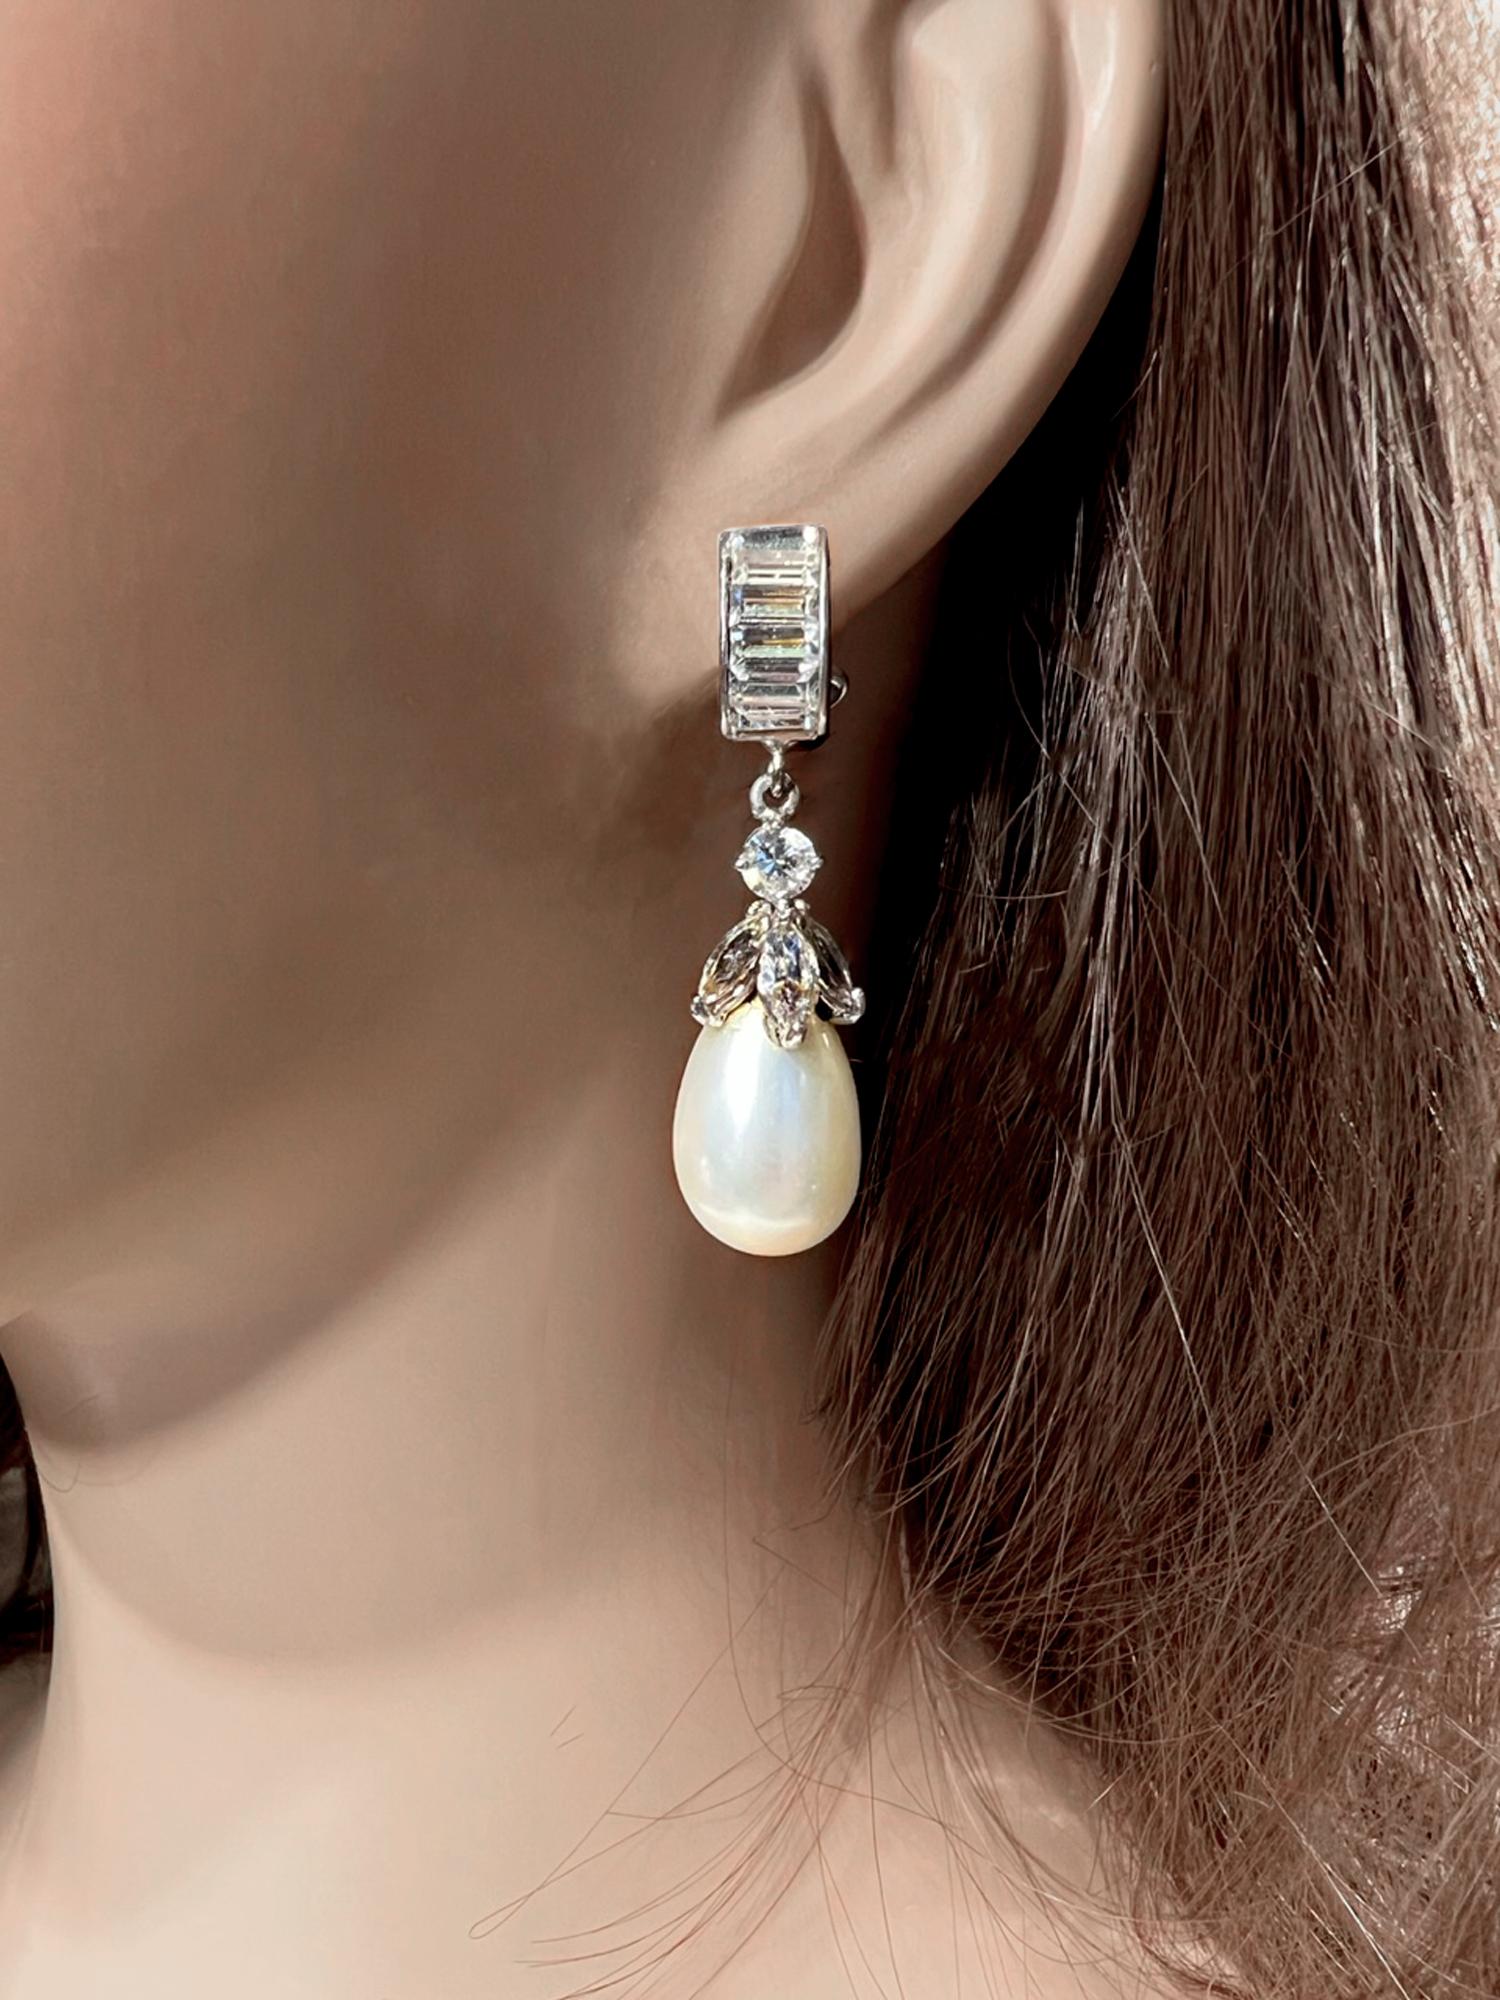 Earrings Vintage Baguette Swarovski Diamanté Huggie Rhodium Japanese Hand Made Glass Pearl Drop Earrings Bridal Evening Wear
The perfect elegant, discrete diamond look is in a mint sparkly Diamanté  pearl dangly ear clip—half by a quarter inch and